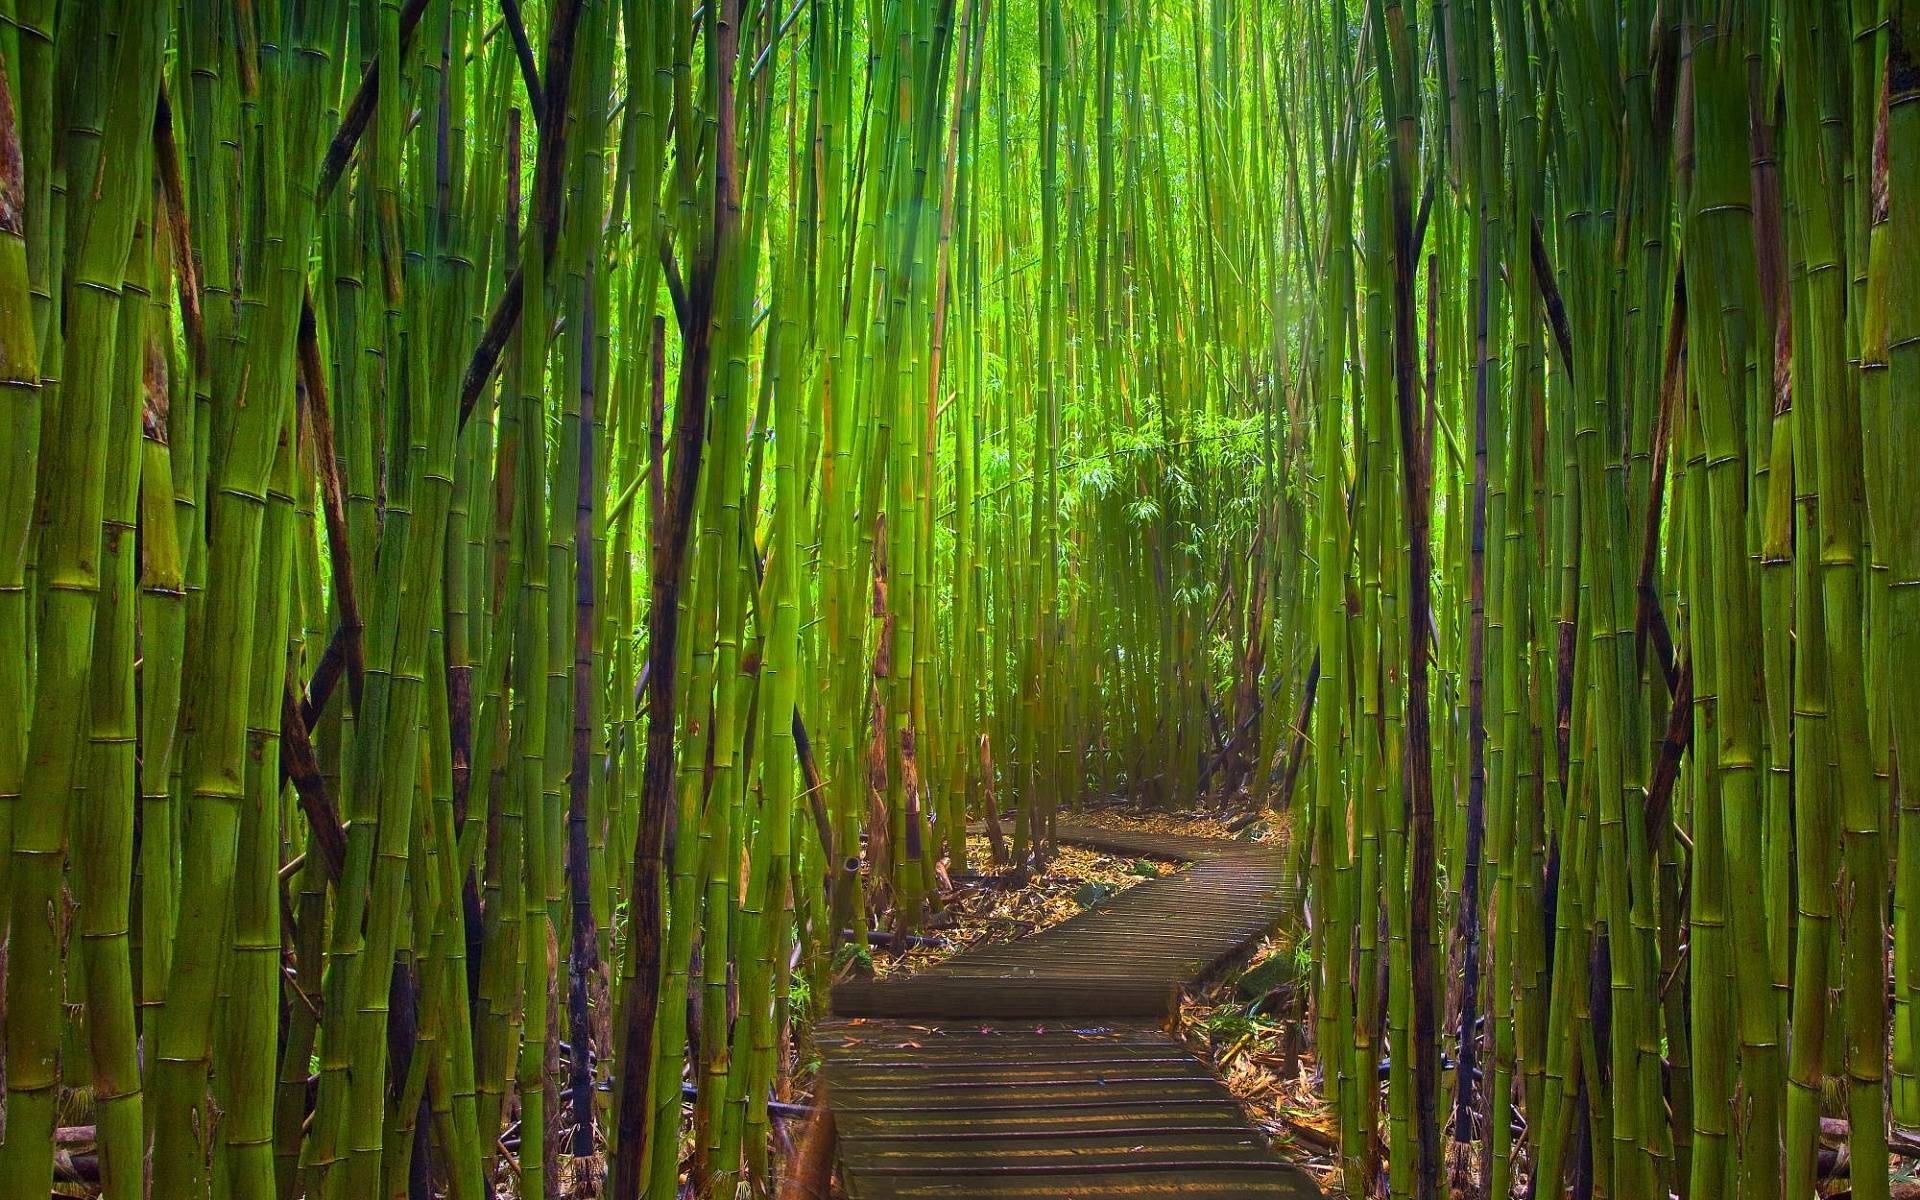 Road with Green Bamboo Wallpaper and Photo Download by PHOTOSof.ORG